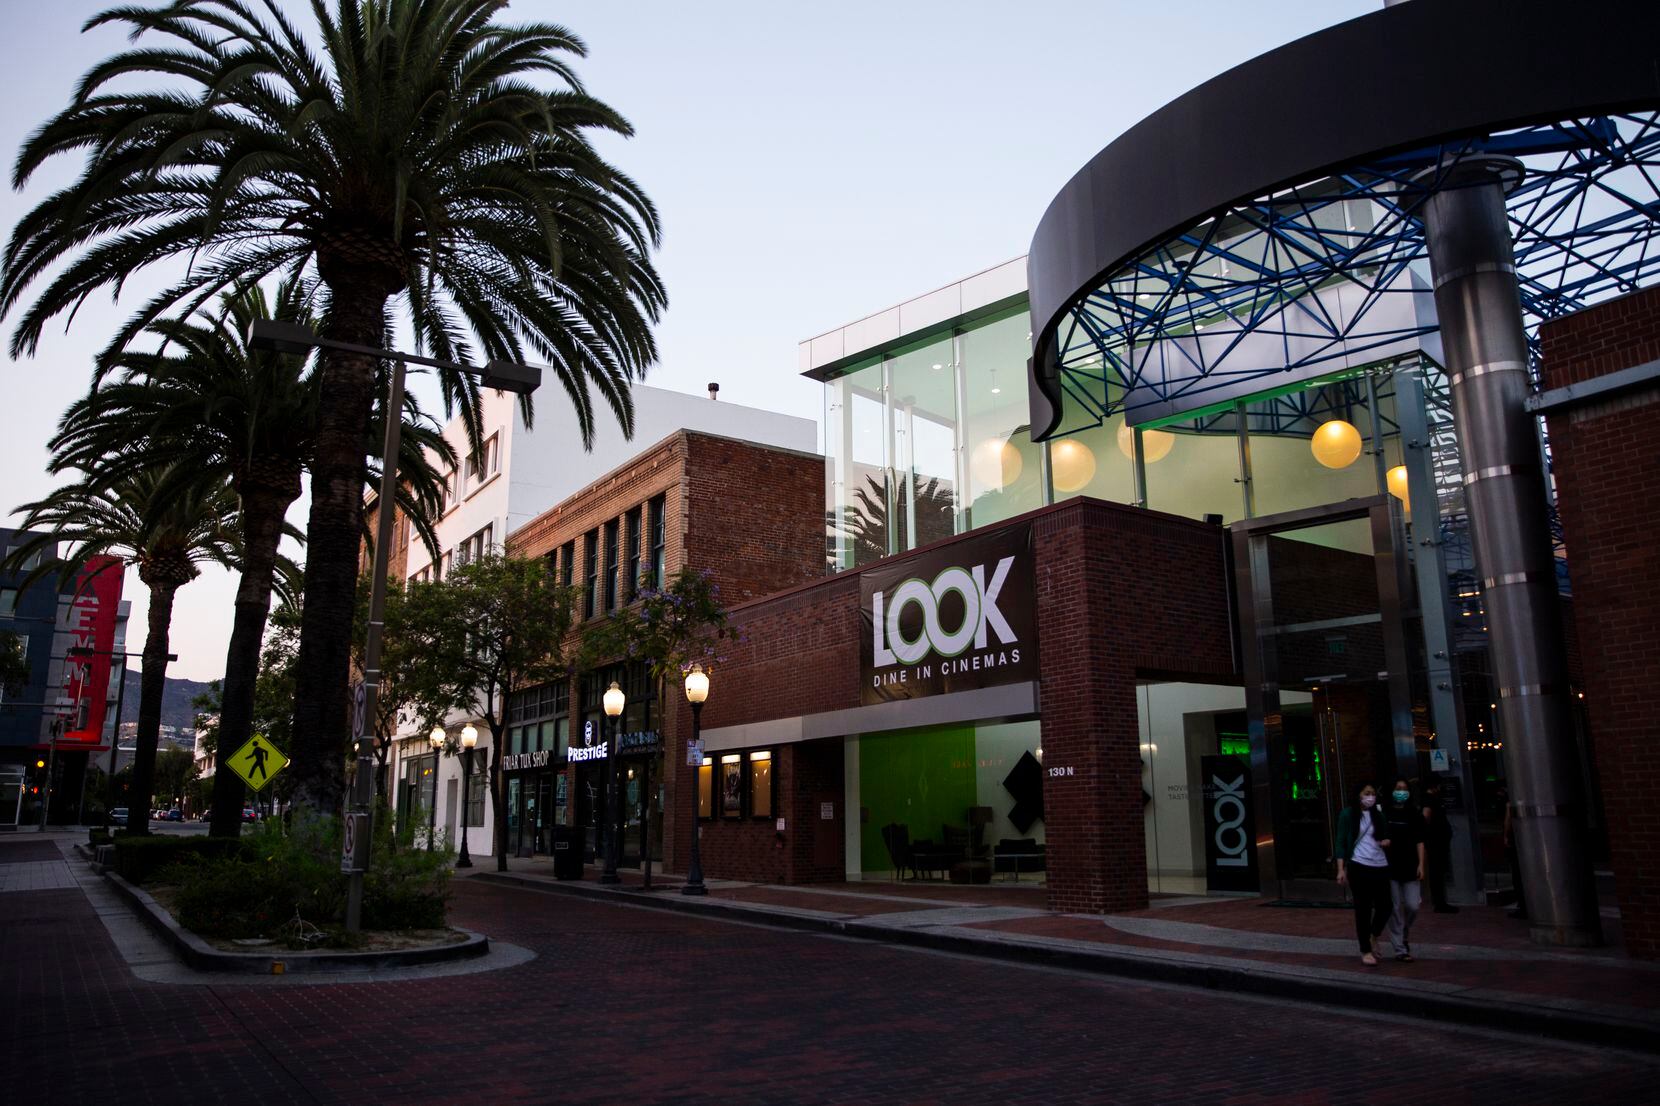 This Look Cinemas location in Glendale, Calif., is the fledgling chain's fifth theater.